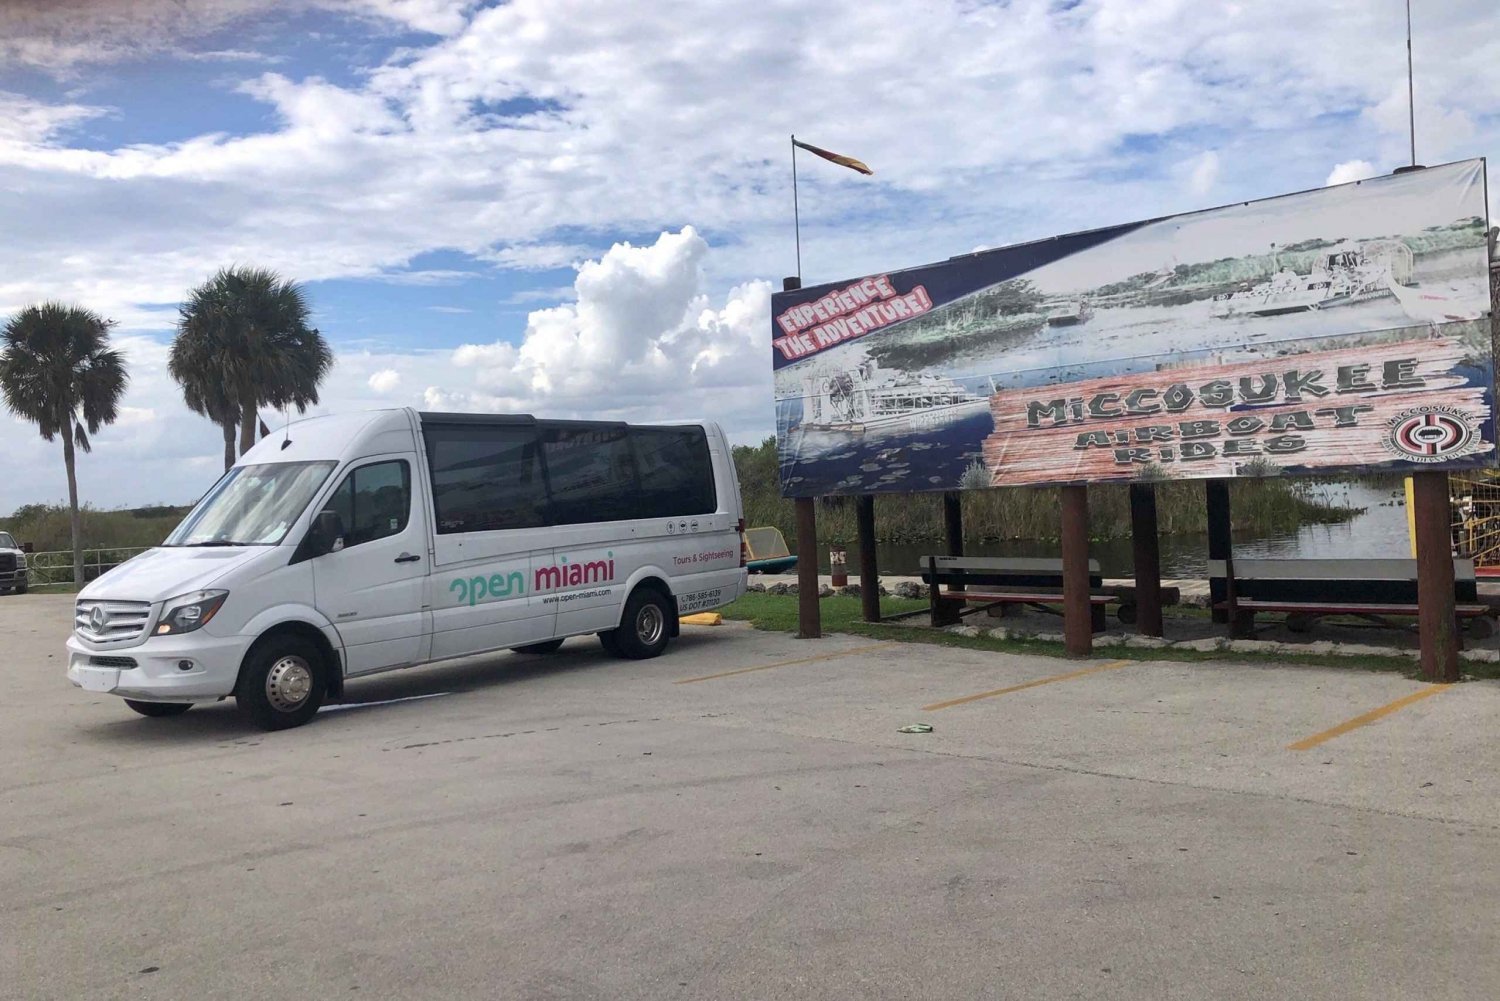 Miami: City Tour and the Everglades in a Convertible Bus